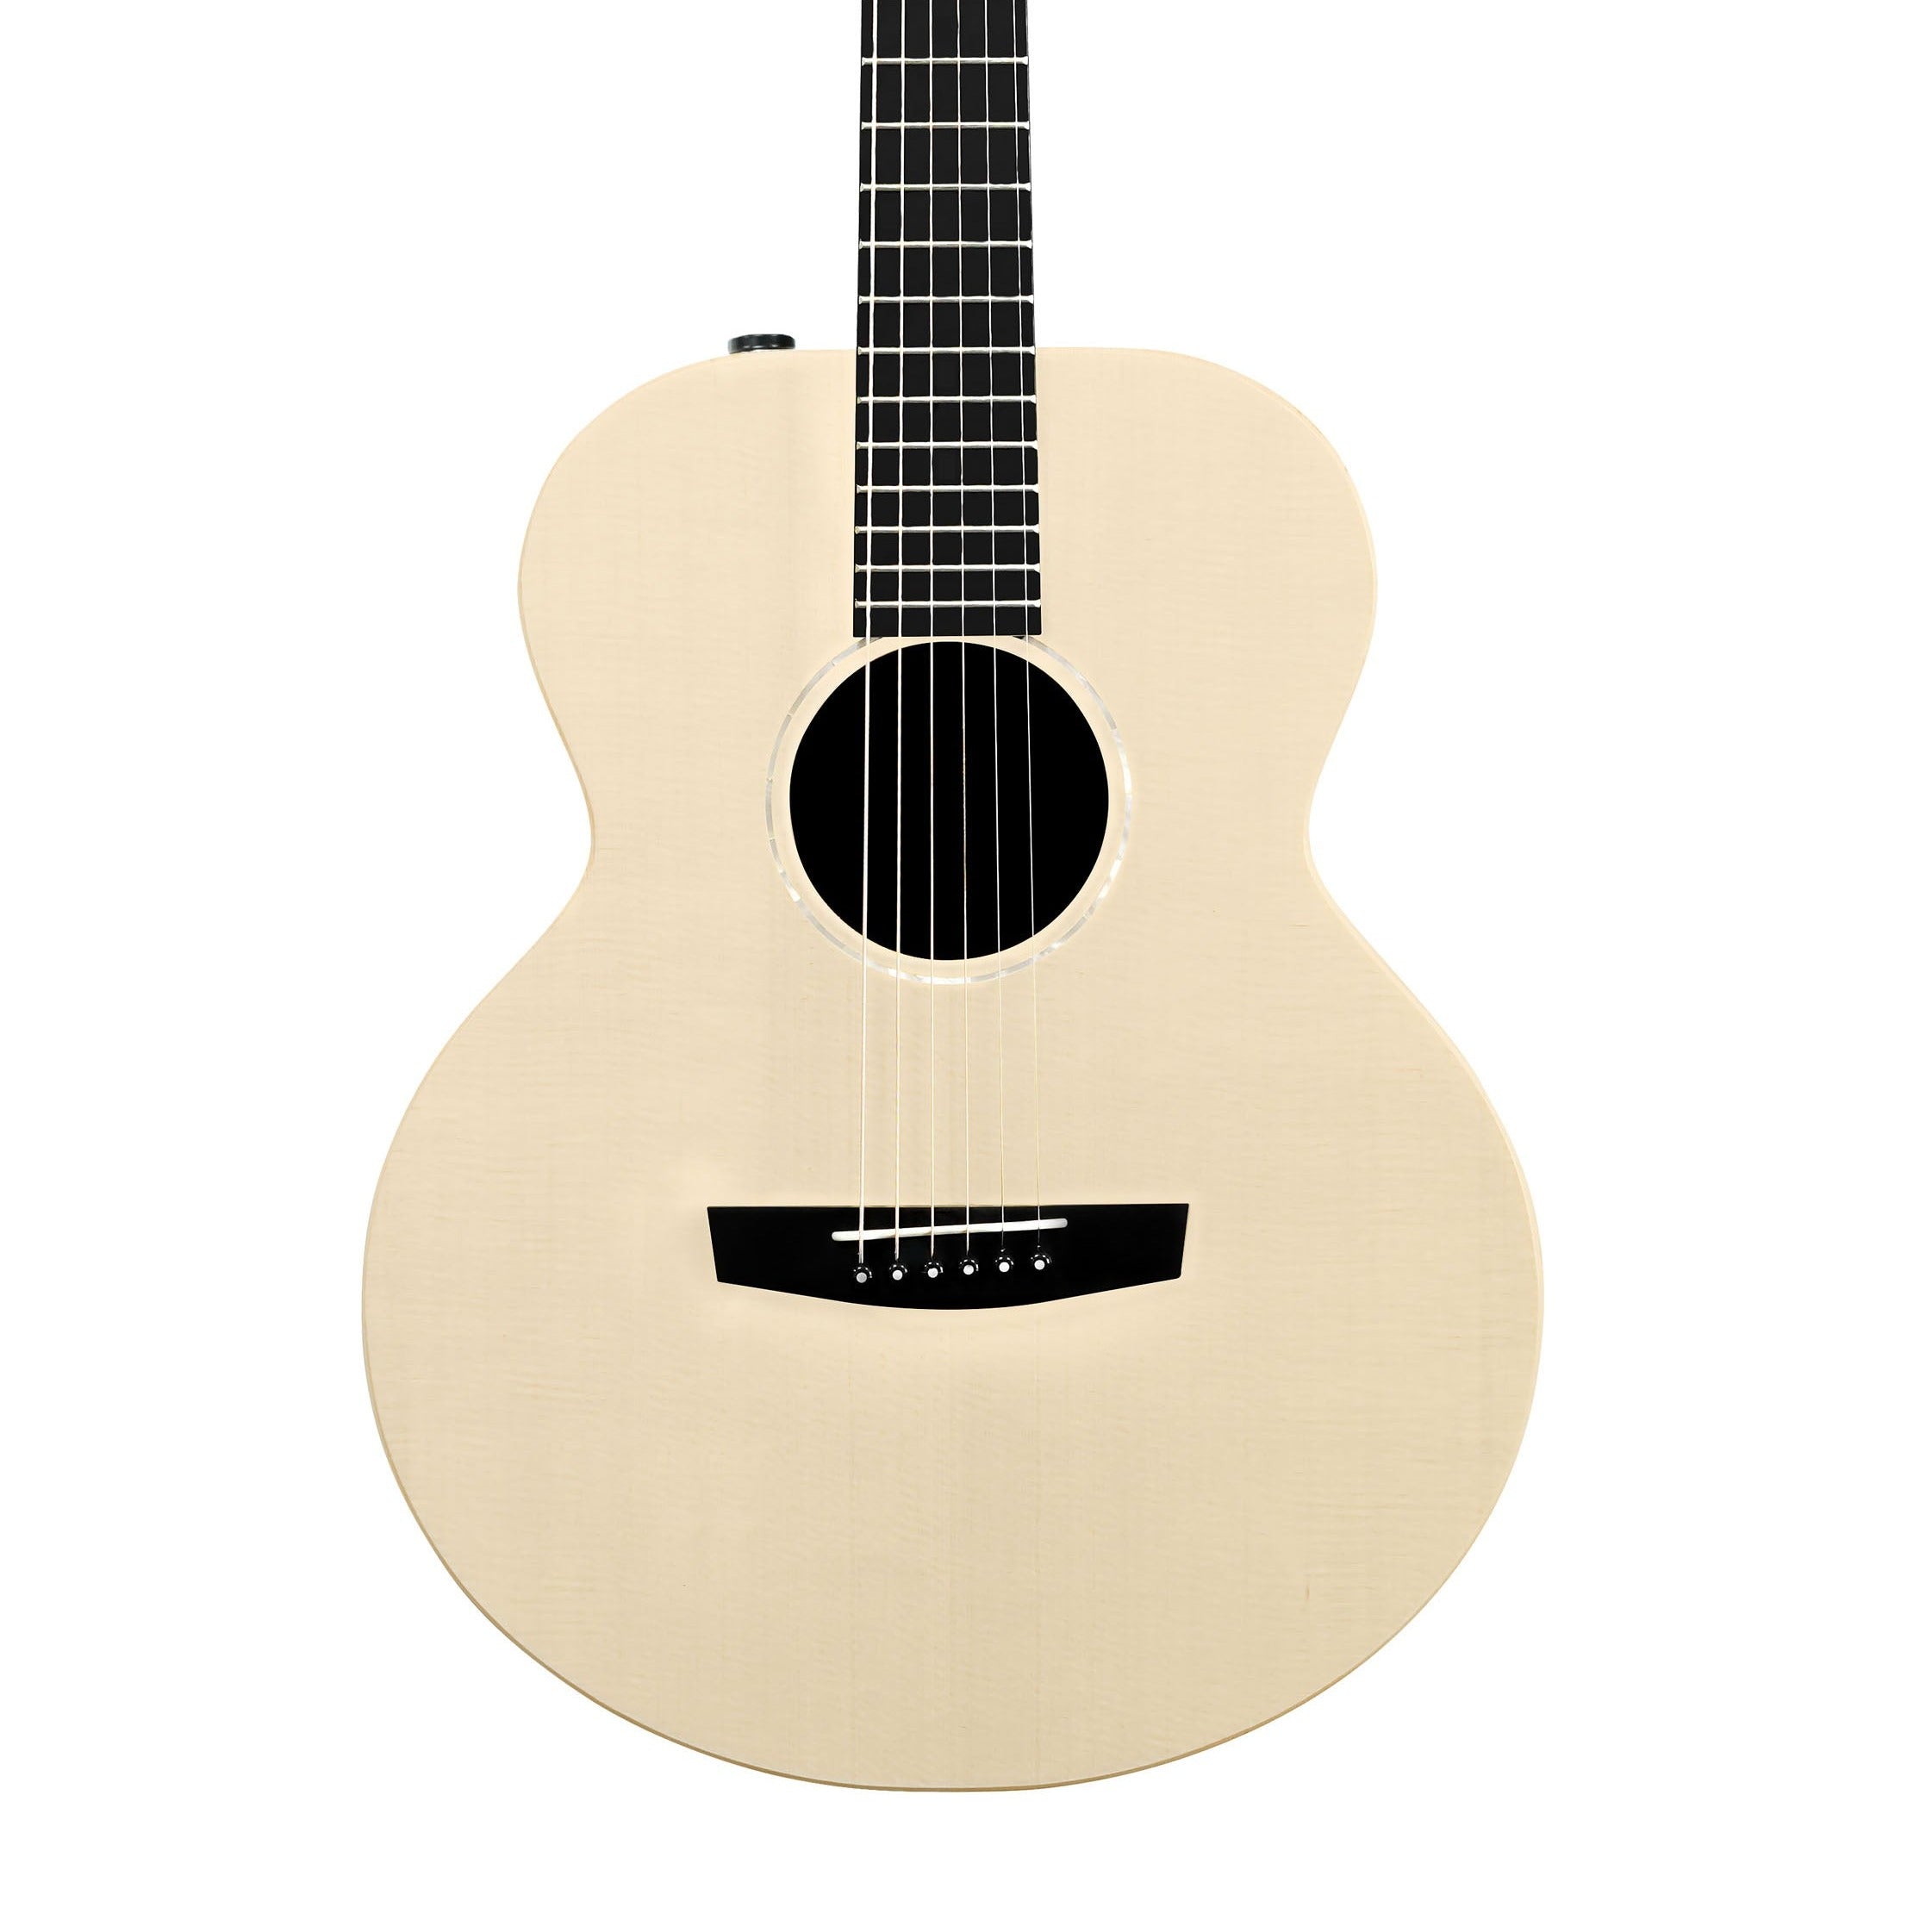 Enya EA-X2e 41" Acoustic Guitar Solid Englemann Spruce Top & Transacoustic Pickup With Bag And Accessories | ENYA , Zoso Music